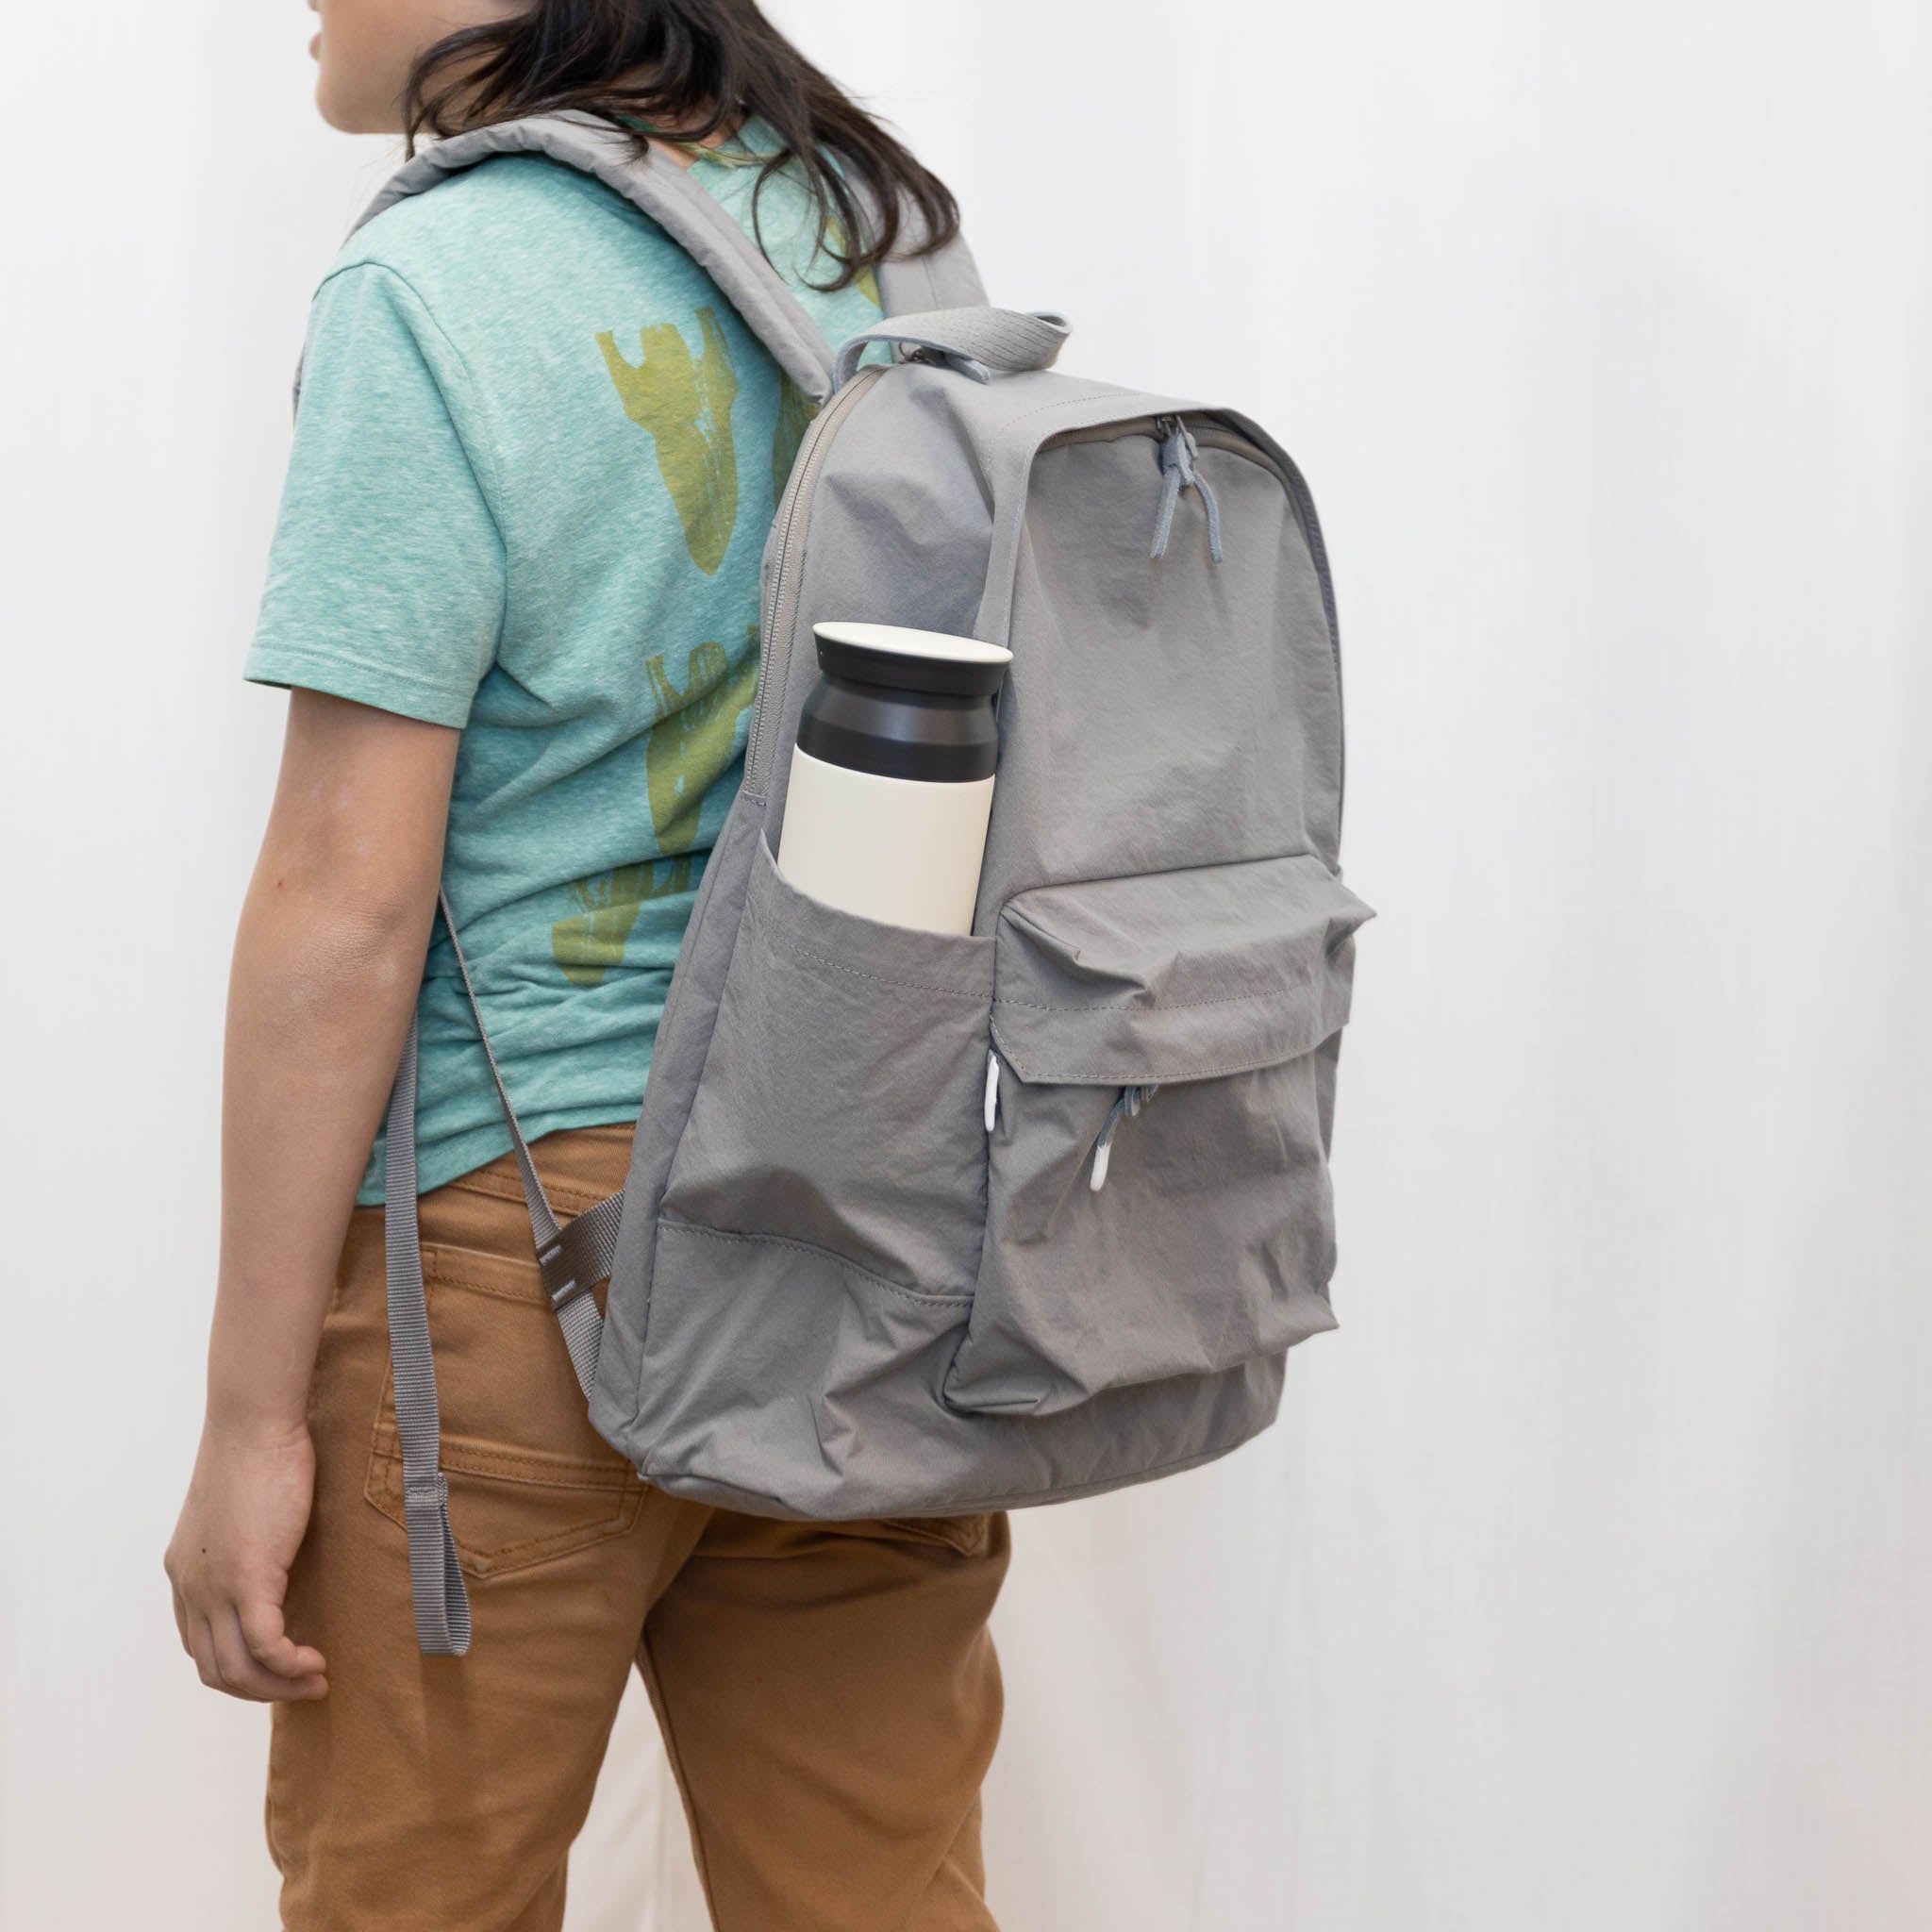 Model 56” (142cm) height / Anunfold Book Pack | Tortoise General Store